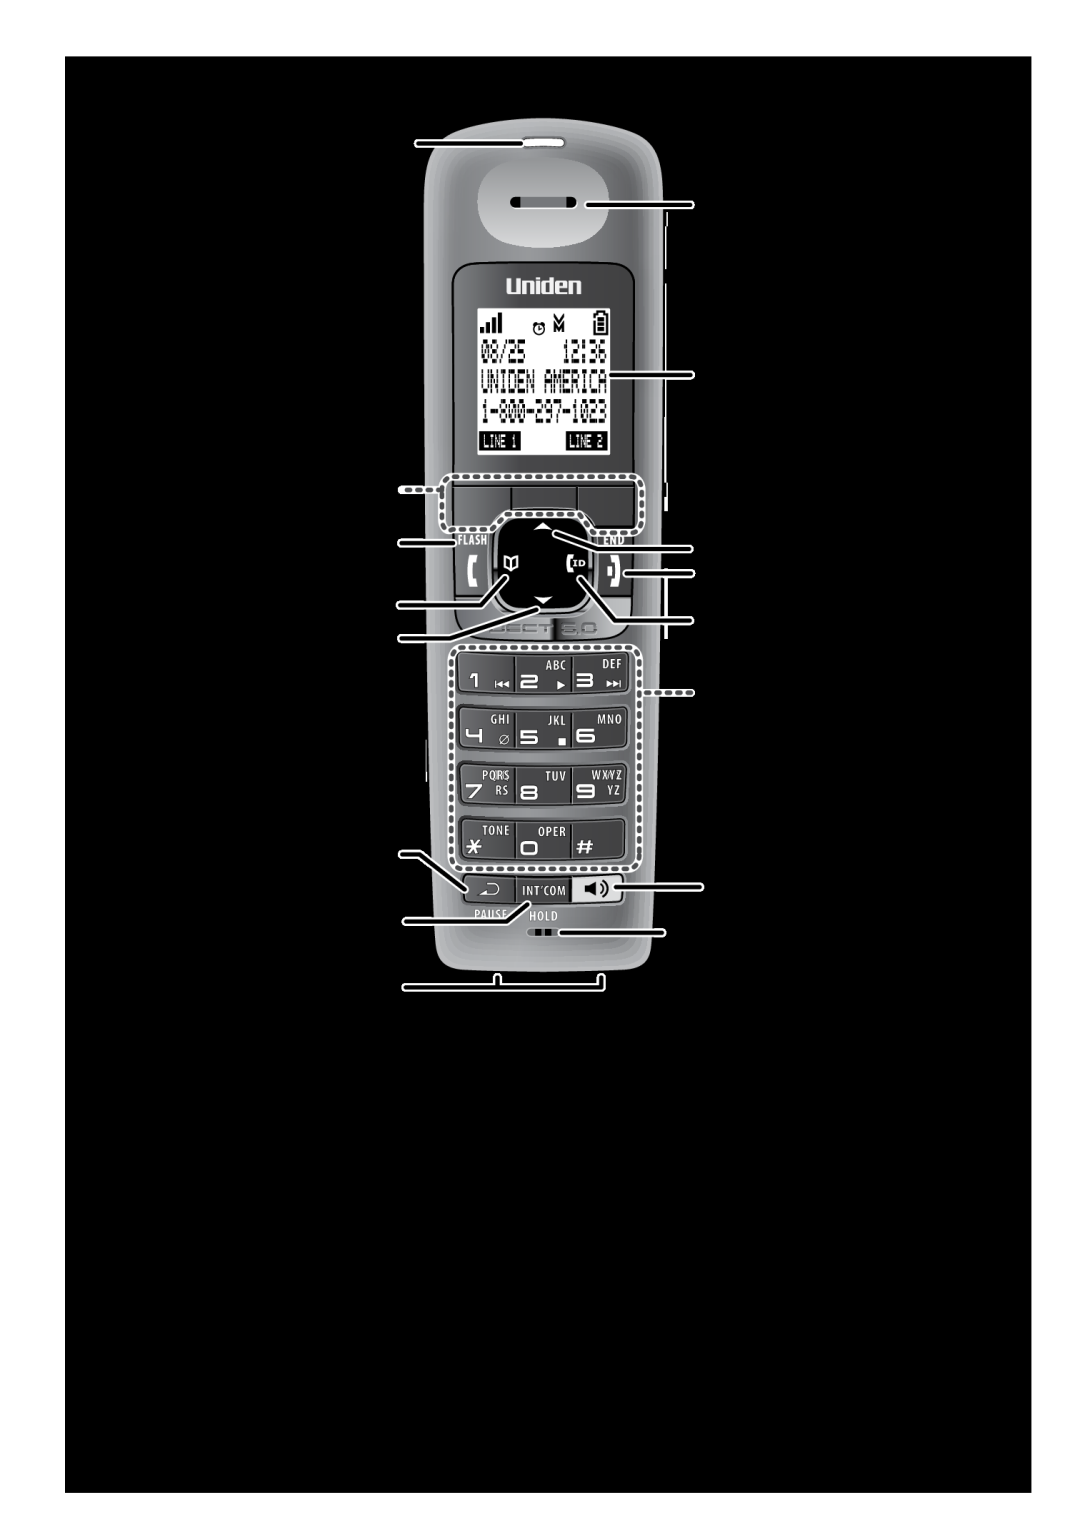 Uniden DECT4086-6, DECT4086-2 manual Parts of the Handset, Handset keys and how they work, Key name, What it does, and icon 